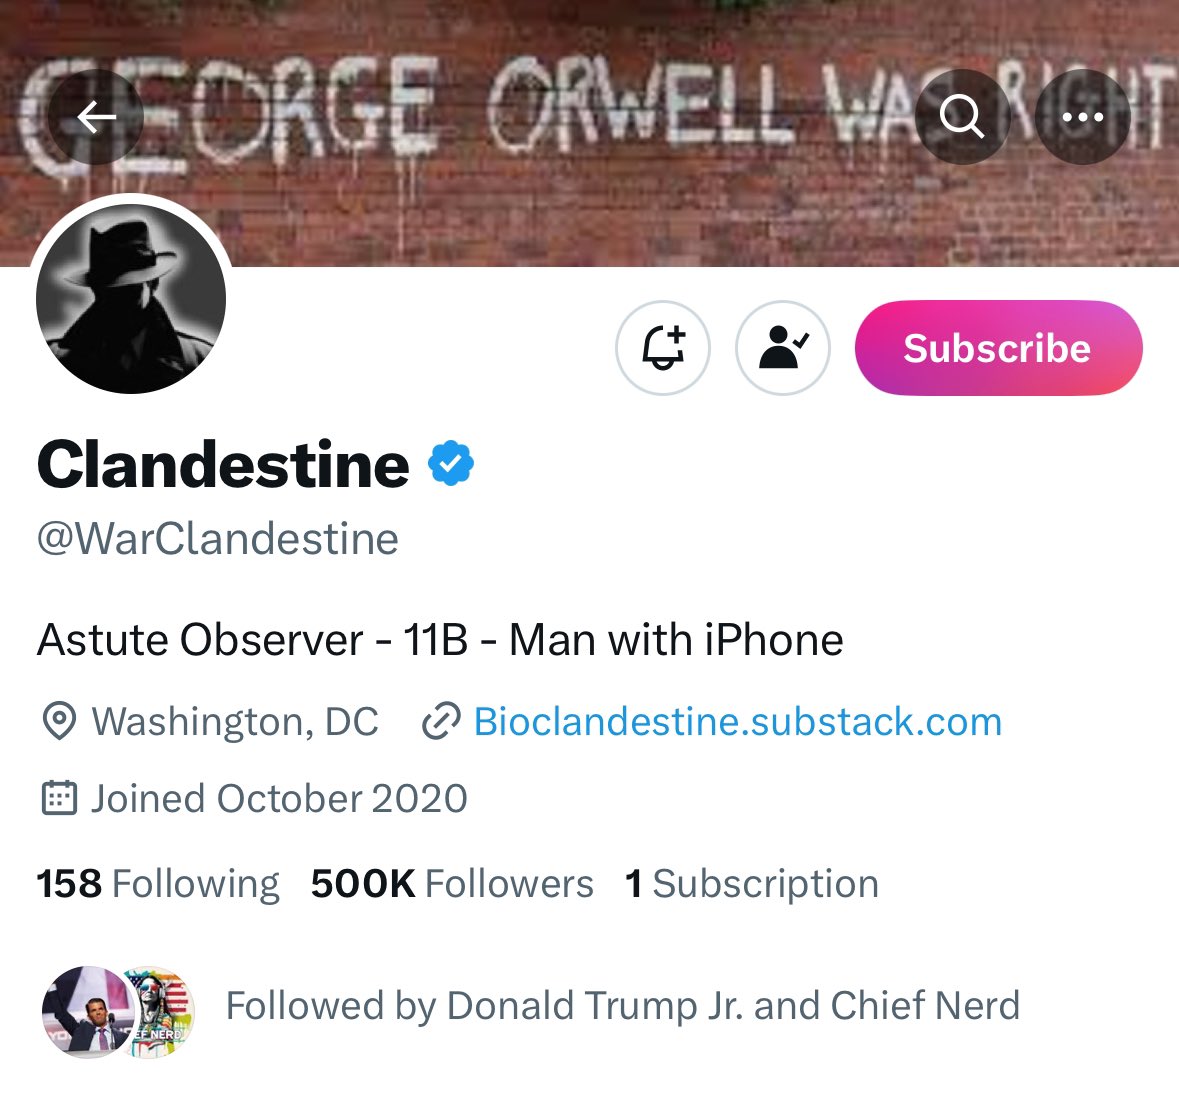 Just hit half a million followers 👀 Shout out to those of you who stuck with me and gave me a chance. And shout out to my enemies who desperately tried to stop me. I look forward to continuing to use this platform to wake normies and defeat the MSM. Who’s with me?